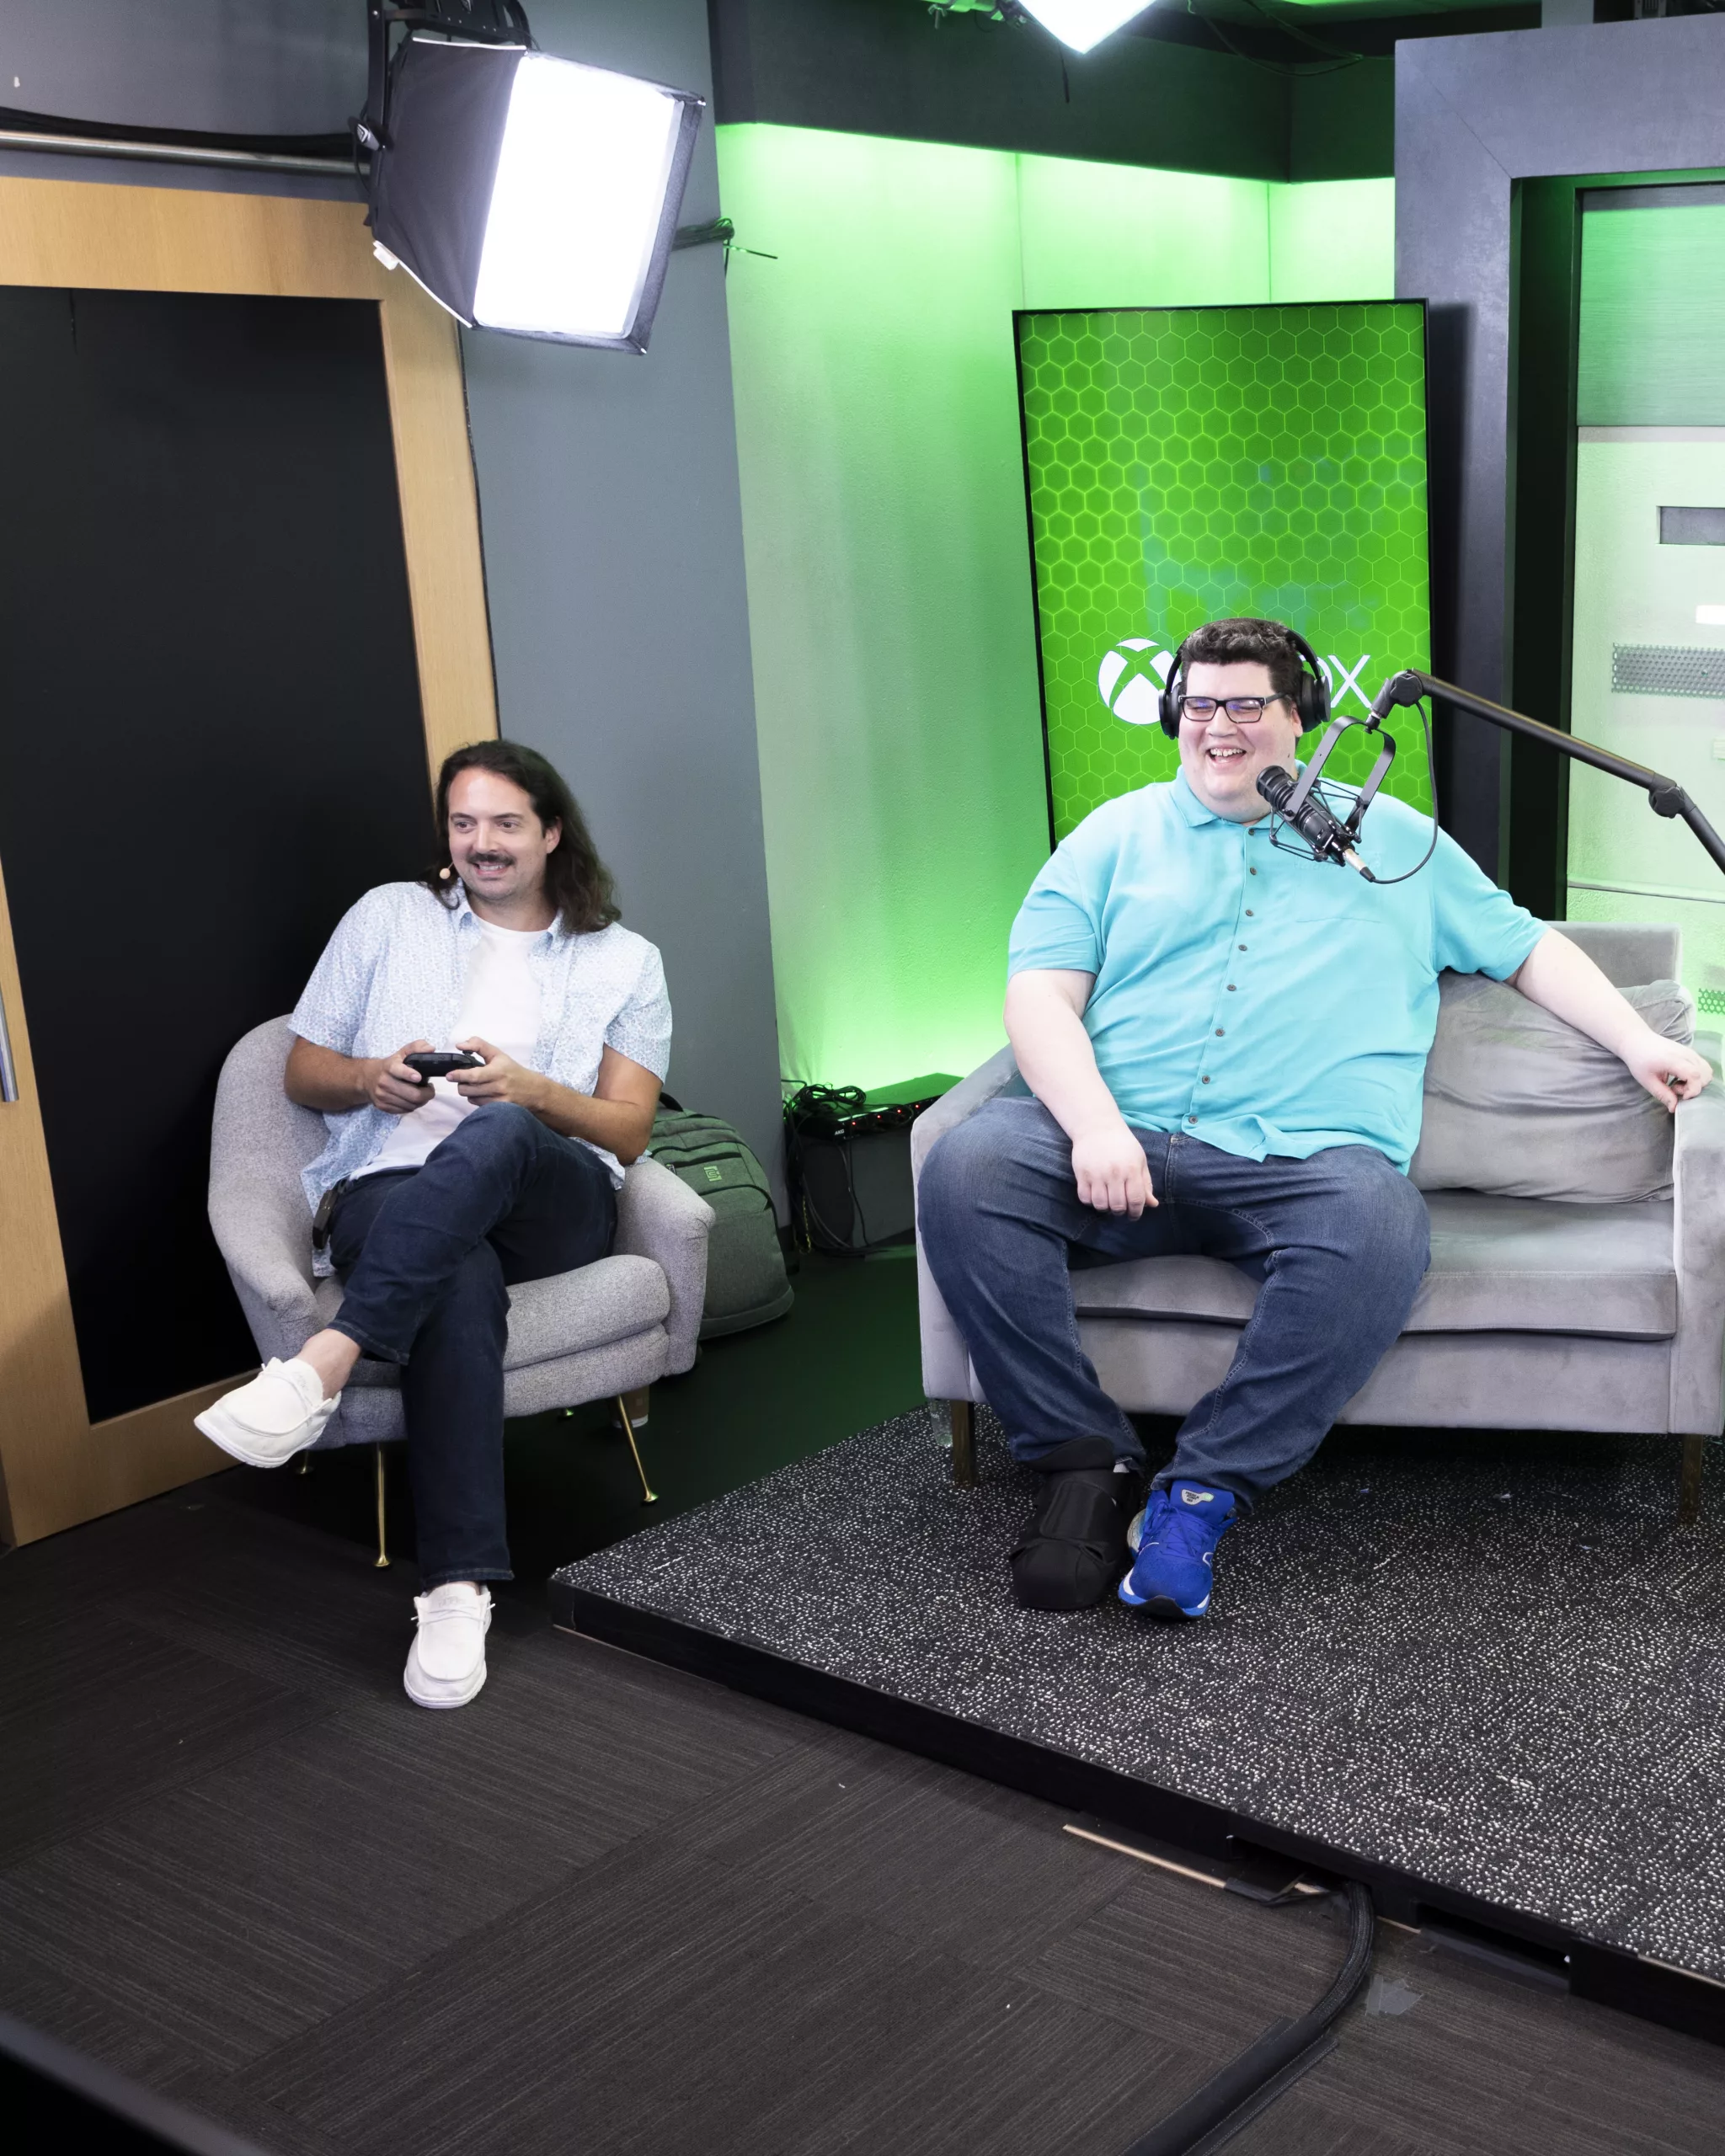 Two people sitting in chairs. One man on the left wearing a light blue shirt holds a video game controller. Another man on the left wearing a blue shirt has a microphone in front of him and is wearing headphones.